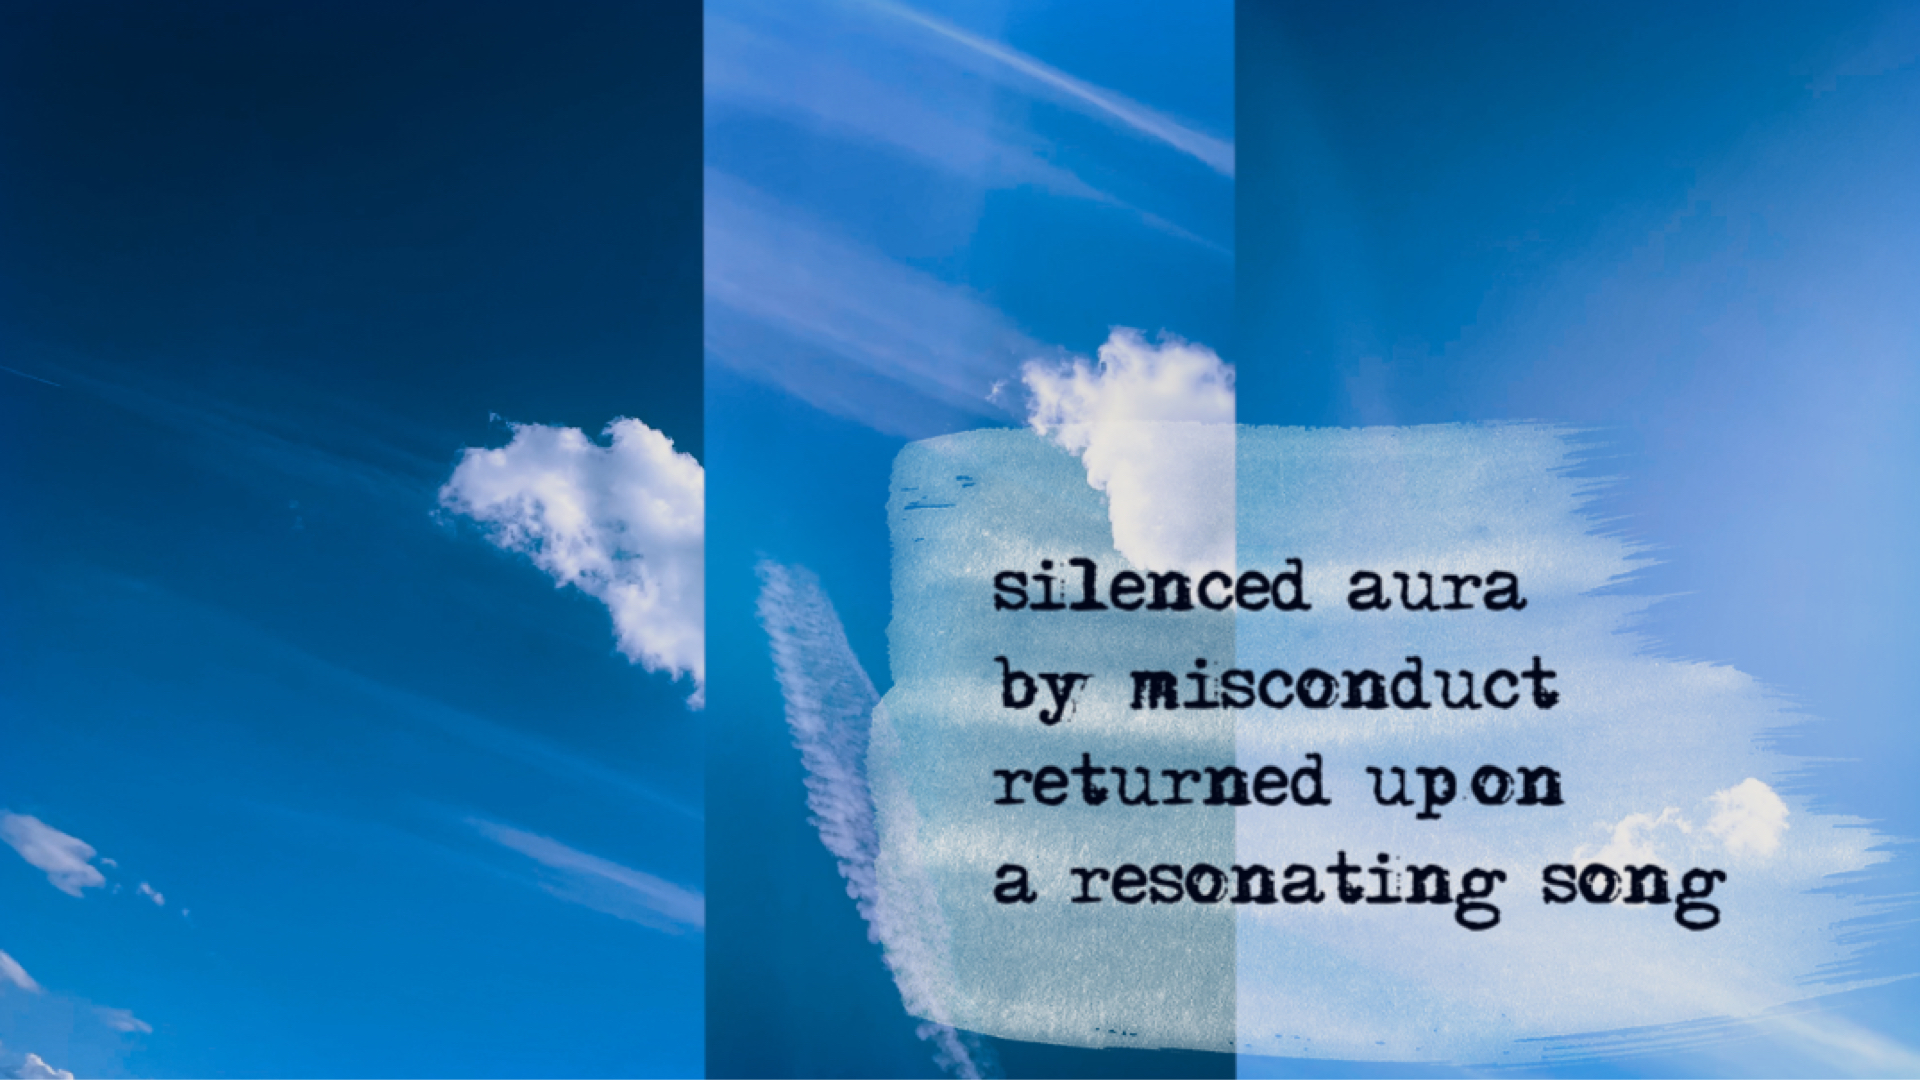 silenced aura by misconduct returned upon a resonating song. || silenced aura || was created in May 2022.